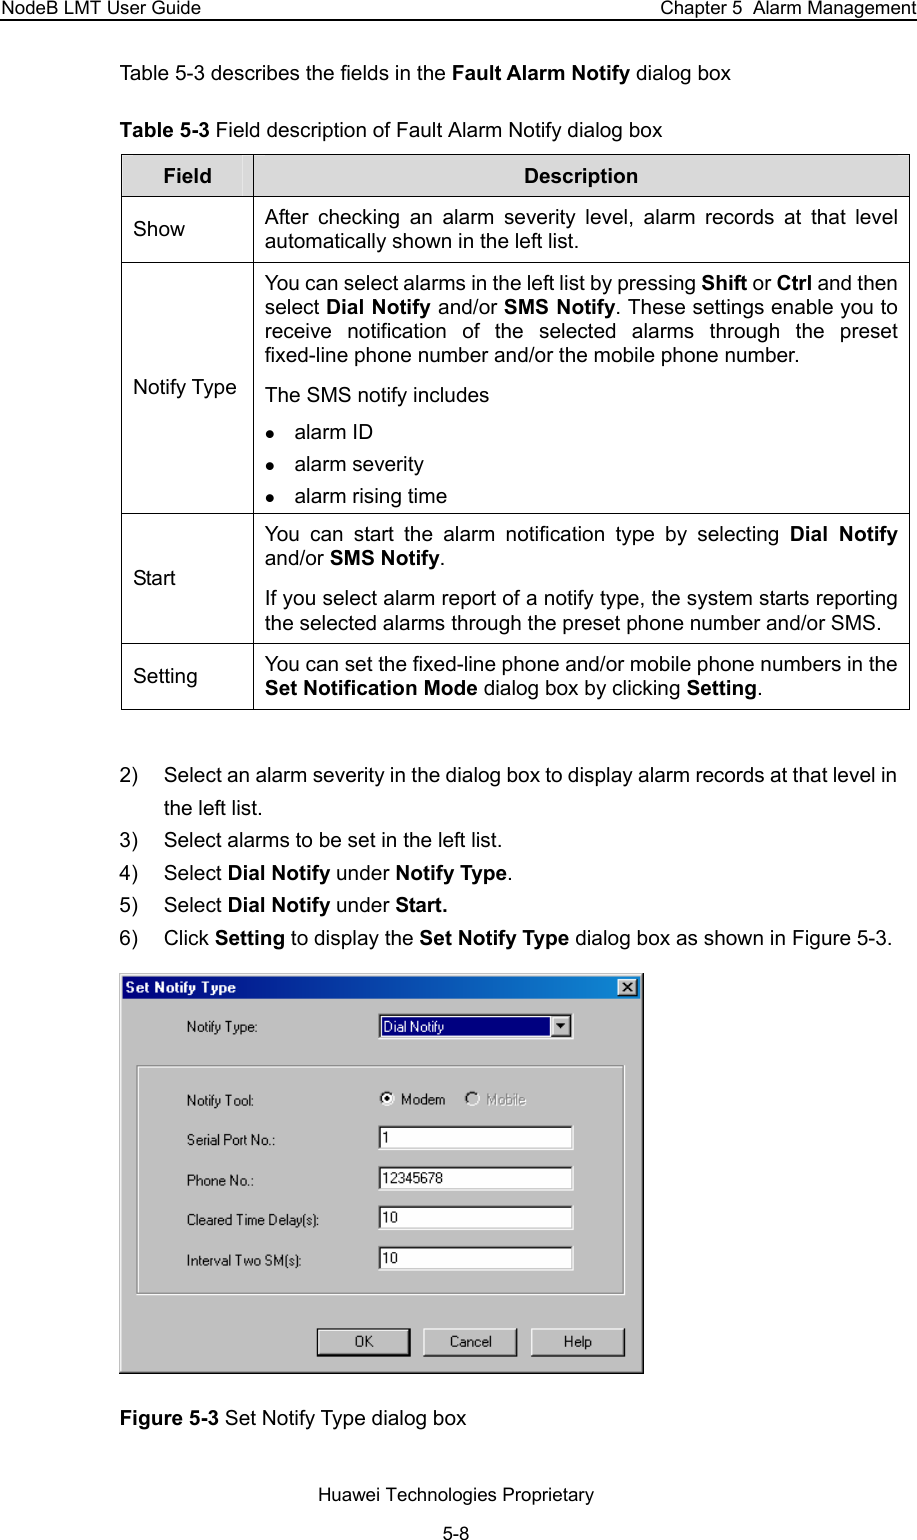 NodeB LMT User Guide  Chapter 5  Alarm Management Table 5-3 describes the fields in the Fault Alarm Notify dialog box  Table 5-3 Field description of Fault Alarm Notify dialog box Field   Description  Show   After checking an alarm severity level, alarm records at that level automatically shown in the left list.  Notify Type  You can select alarms in the left list by pressing Shift or Ctrl and then select Dial Notify and/or SMS Notify. These settings enable you to receive notification of the selected alarms through the preset fixed-line phone number and/or the mobile phone number.  The SMS notify includes z alarm ID z alarm severity z alarm rising time Start  You can start the alarm notification type by selecting Dial Notify and/or SMS Notify.  If you select alarm report of a notify type, the system starts reporting the selected alarms through the preset phone number and/or SMS.  Setting  You can set the fixed-line phone and/or mobile phone numbers in the Set Notification Mode dialog box by clicking Setting.   2)  Select an alarm severity in the dialog box to display alarm records at that level in the left list.  3)  Select alarms to be set in the left list.  4) Select Dial Notify under Notify Type. 5) Select Dial Notify under Start. 6) Click Setting to display the Set Notify Type dialog box as shown in Figure 5-3.   Figure 5-3 Set Notify Type dialog box Huawei Technologies Proprietary 5-8 